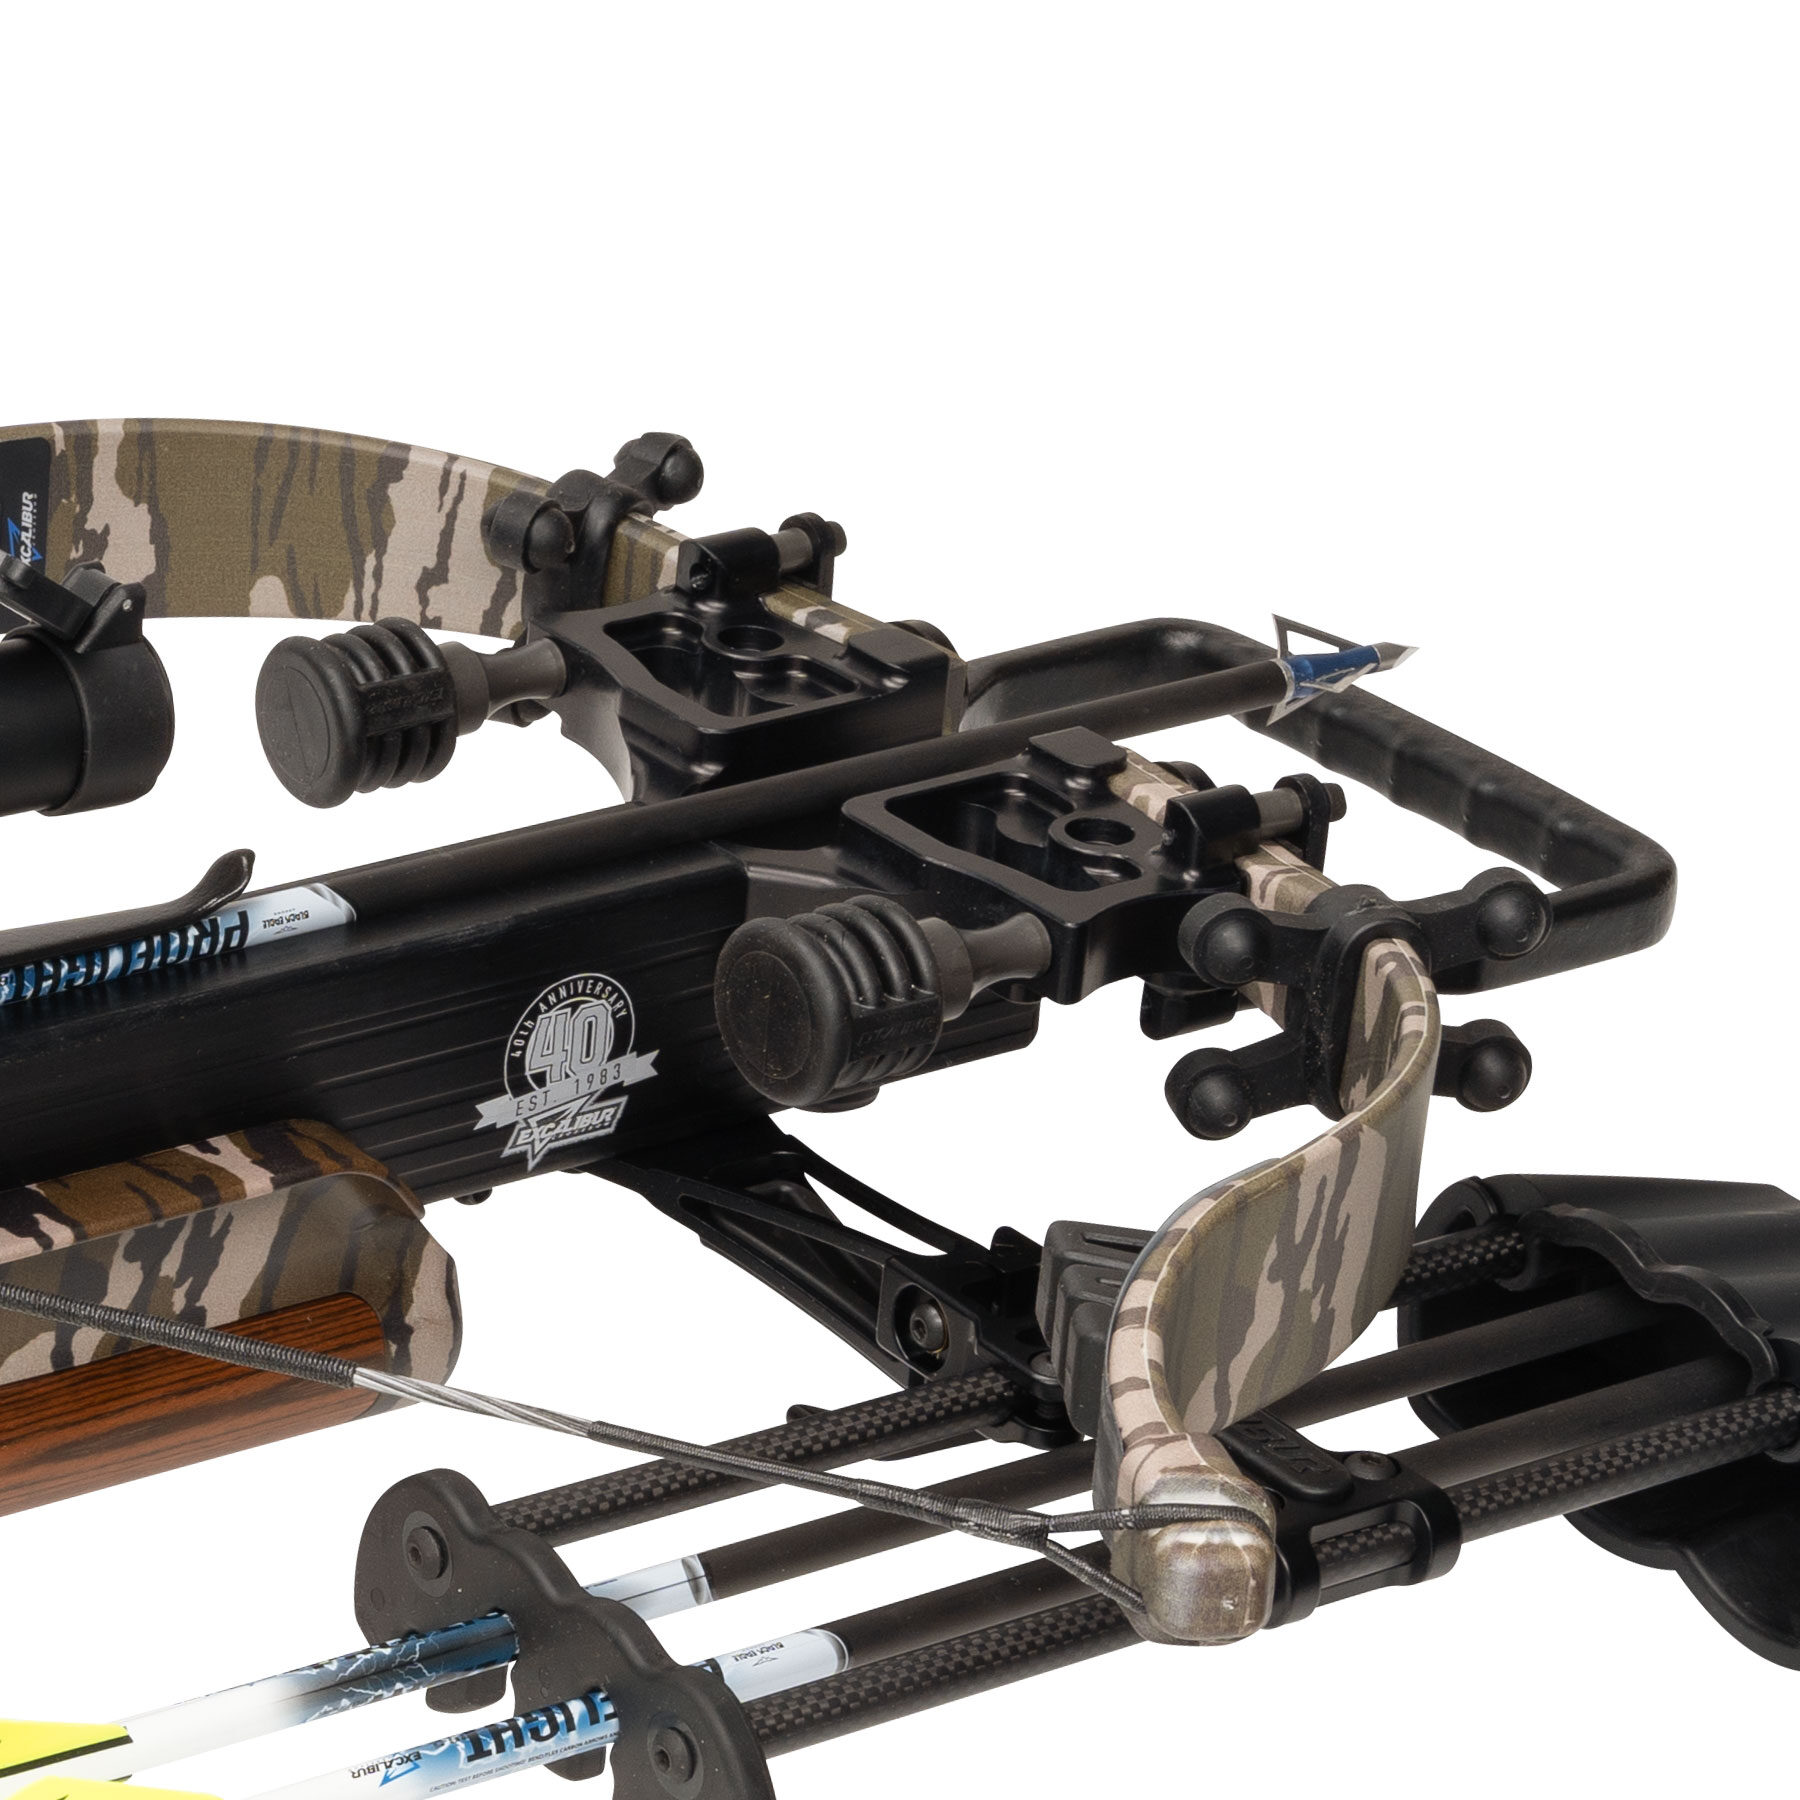 Front end of Wolverine crossbow